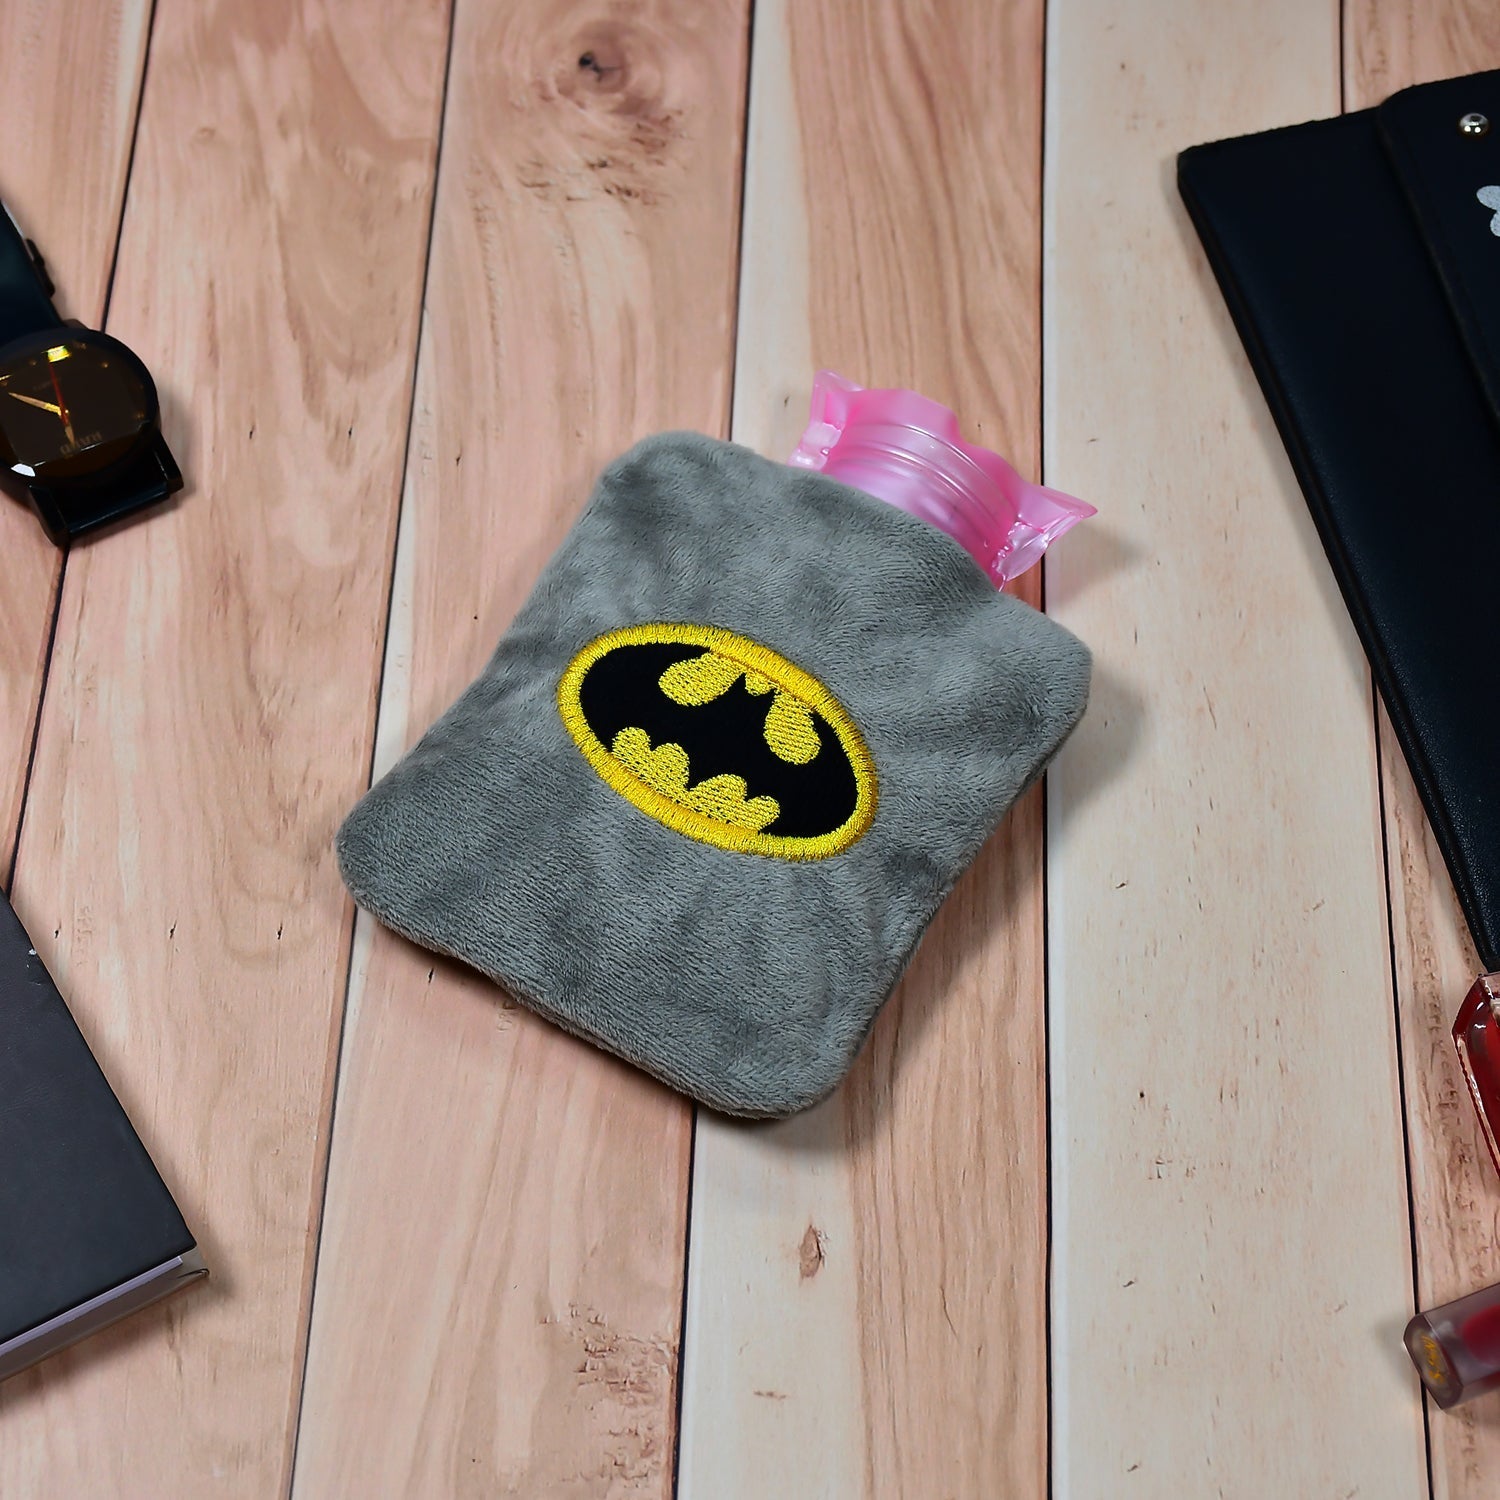 6505 Batman small Hot Water Bag with Cover for Pain Relief, Neck, Shoulder Pain and Hand, Feet Warmer, Menstrual Cramps. DeoDap